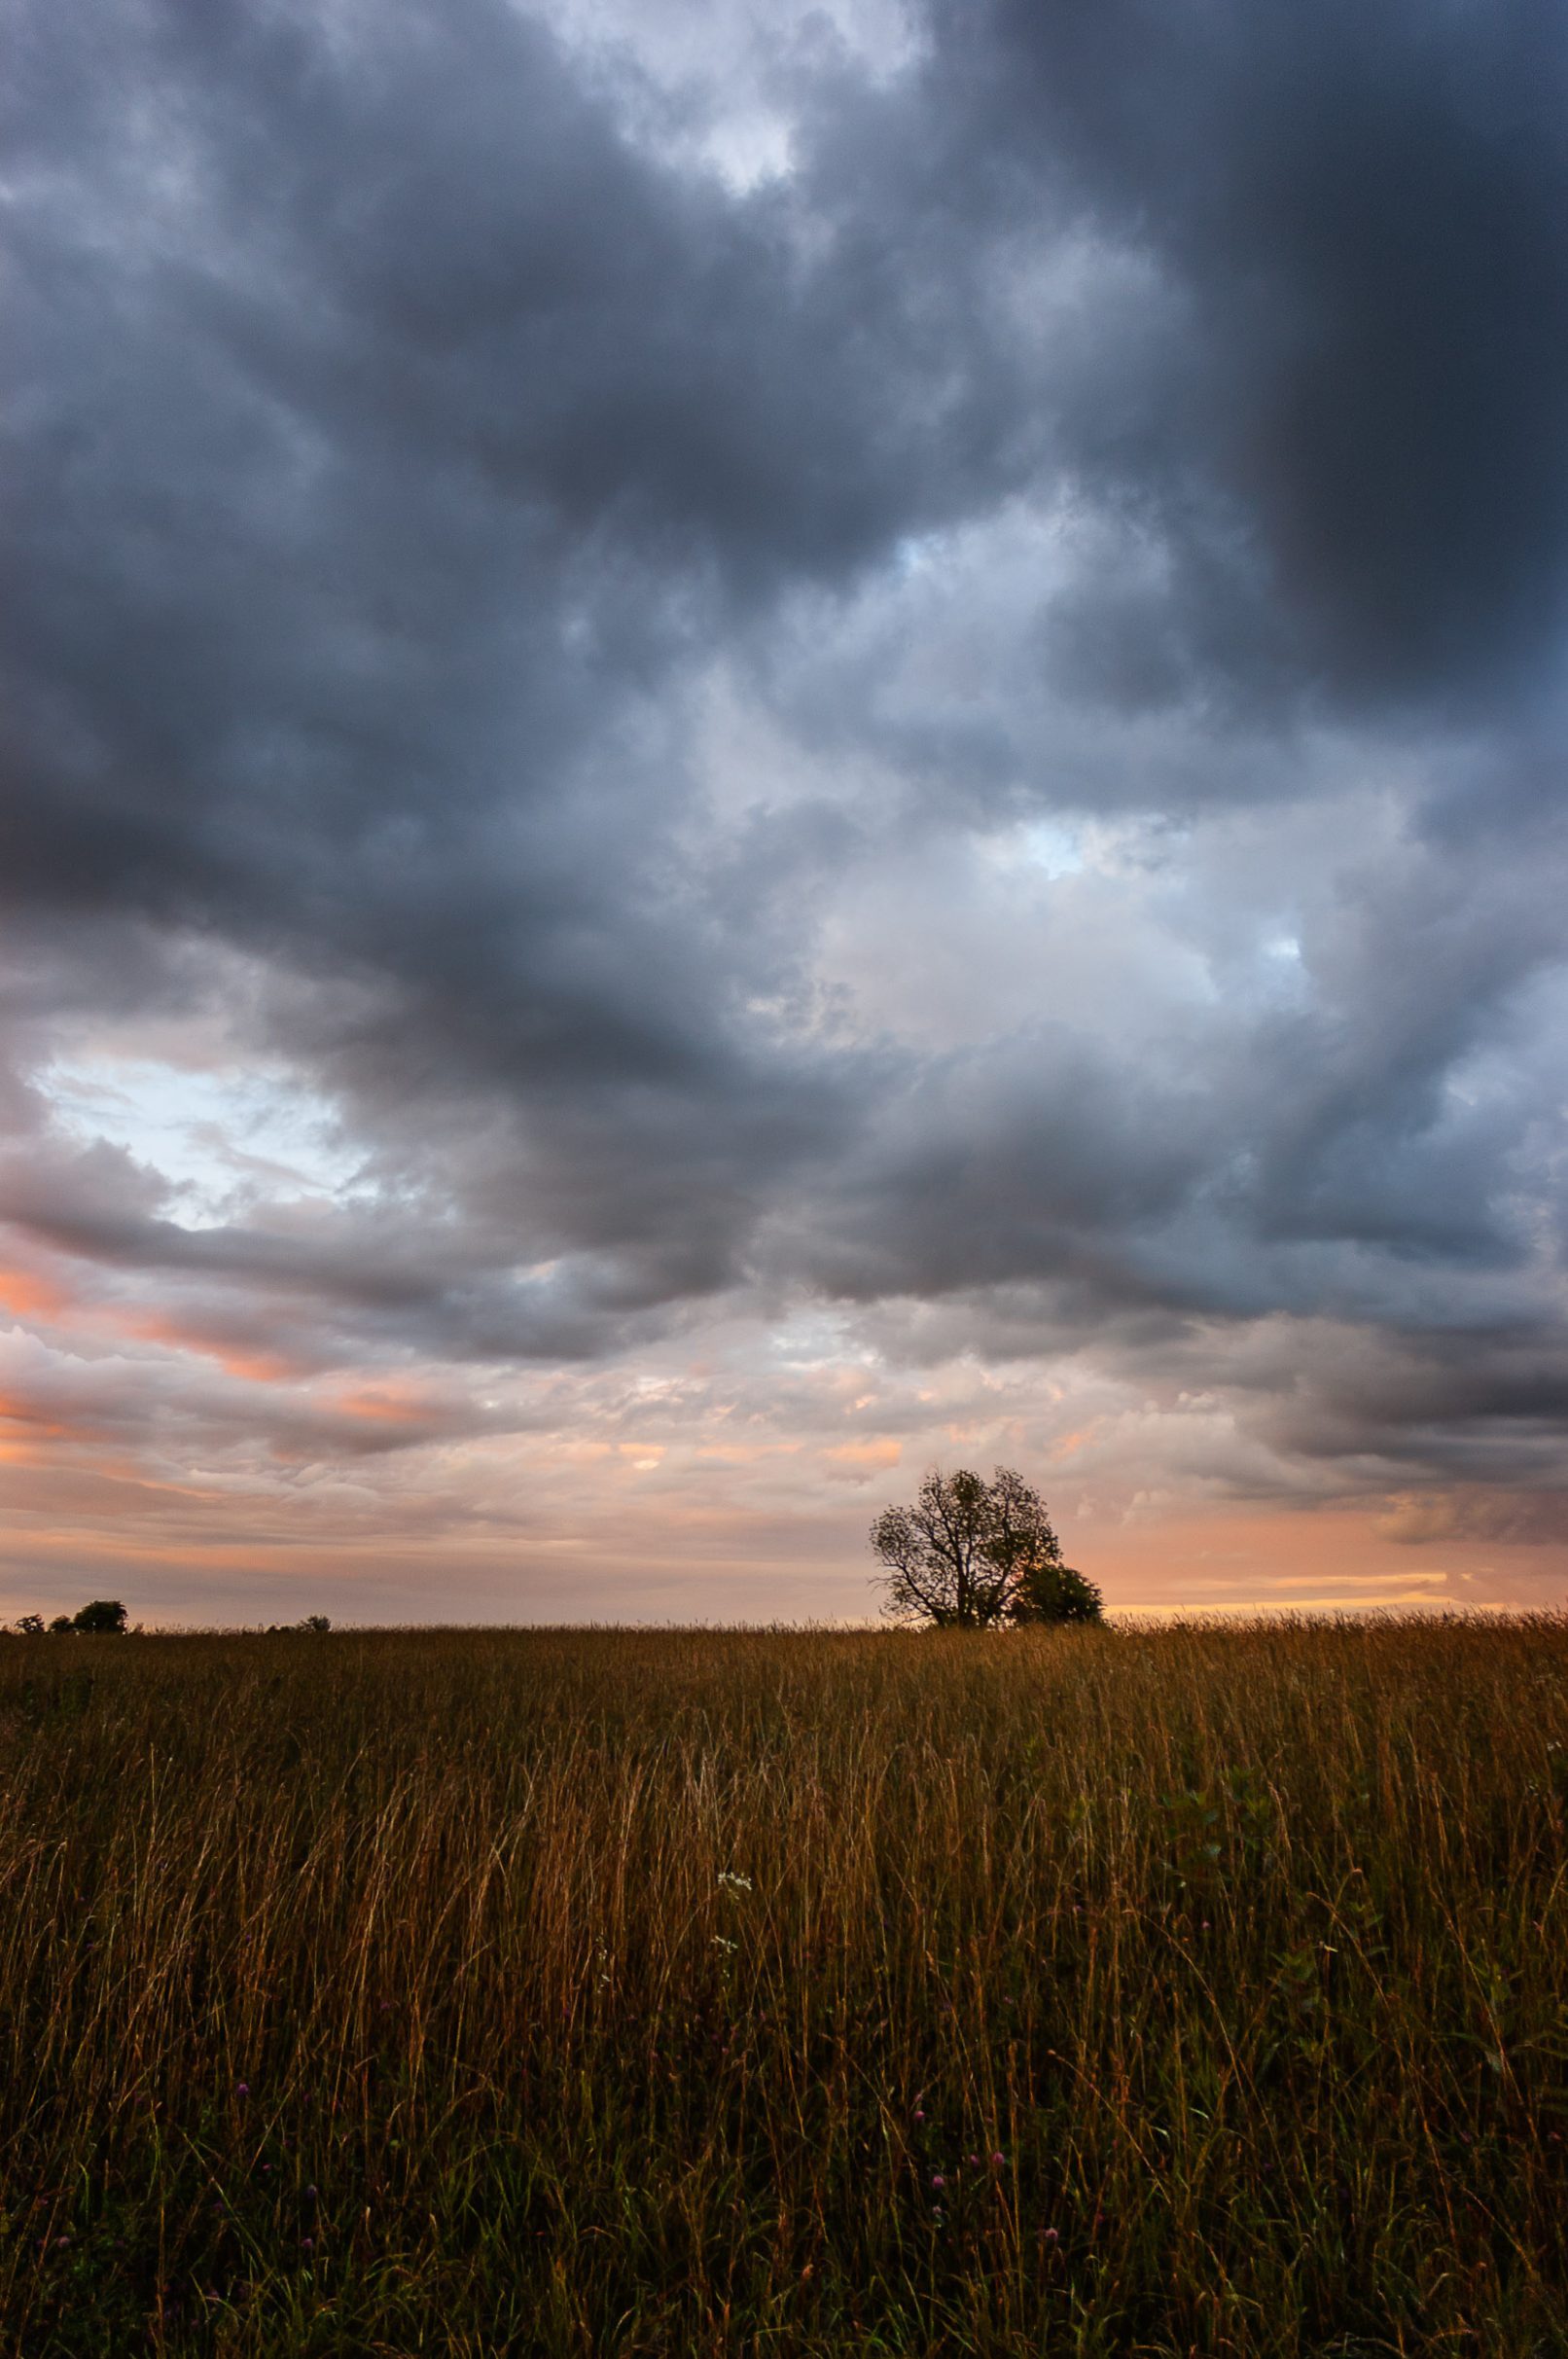 Grassy field with tree, clouds and evening light